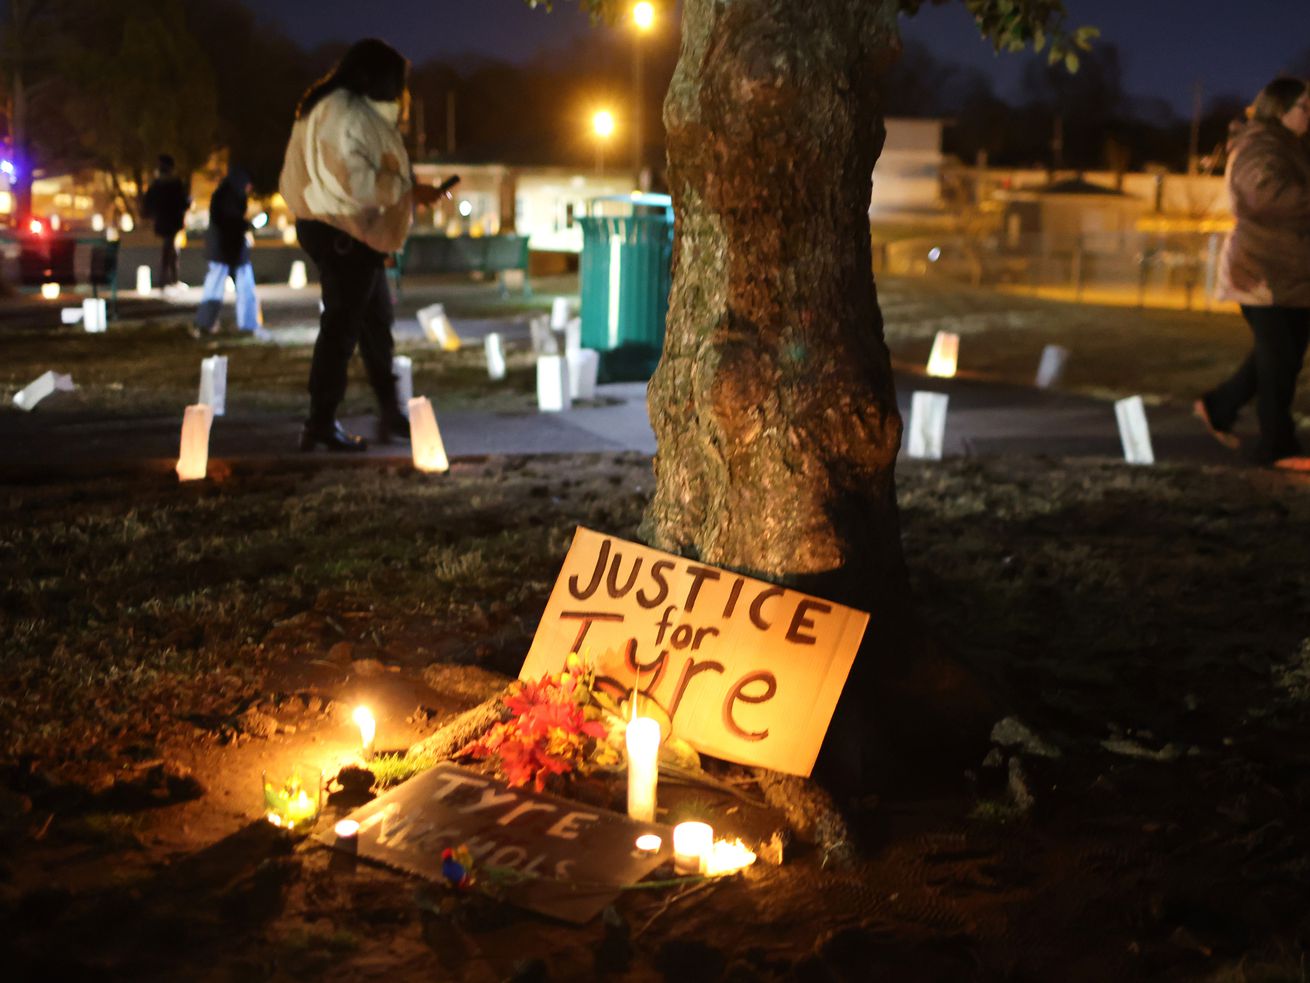 People attend a candlelight vigil in memory of Tyre Nichols at the Tobey Skate Park on January 26, 2023 in Memphis, Tennessee.